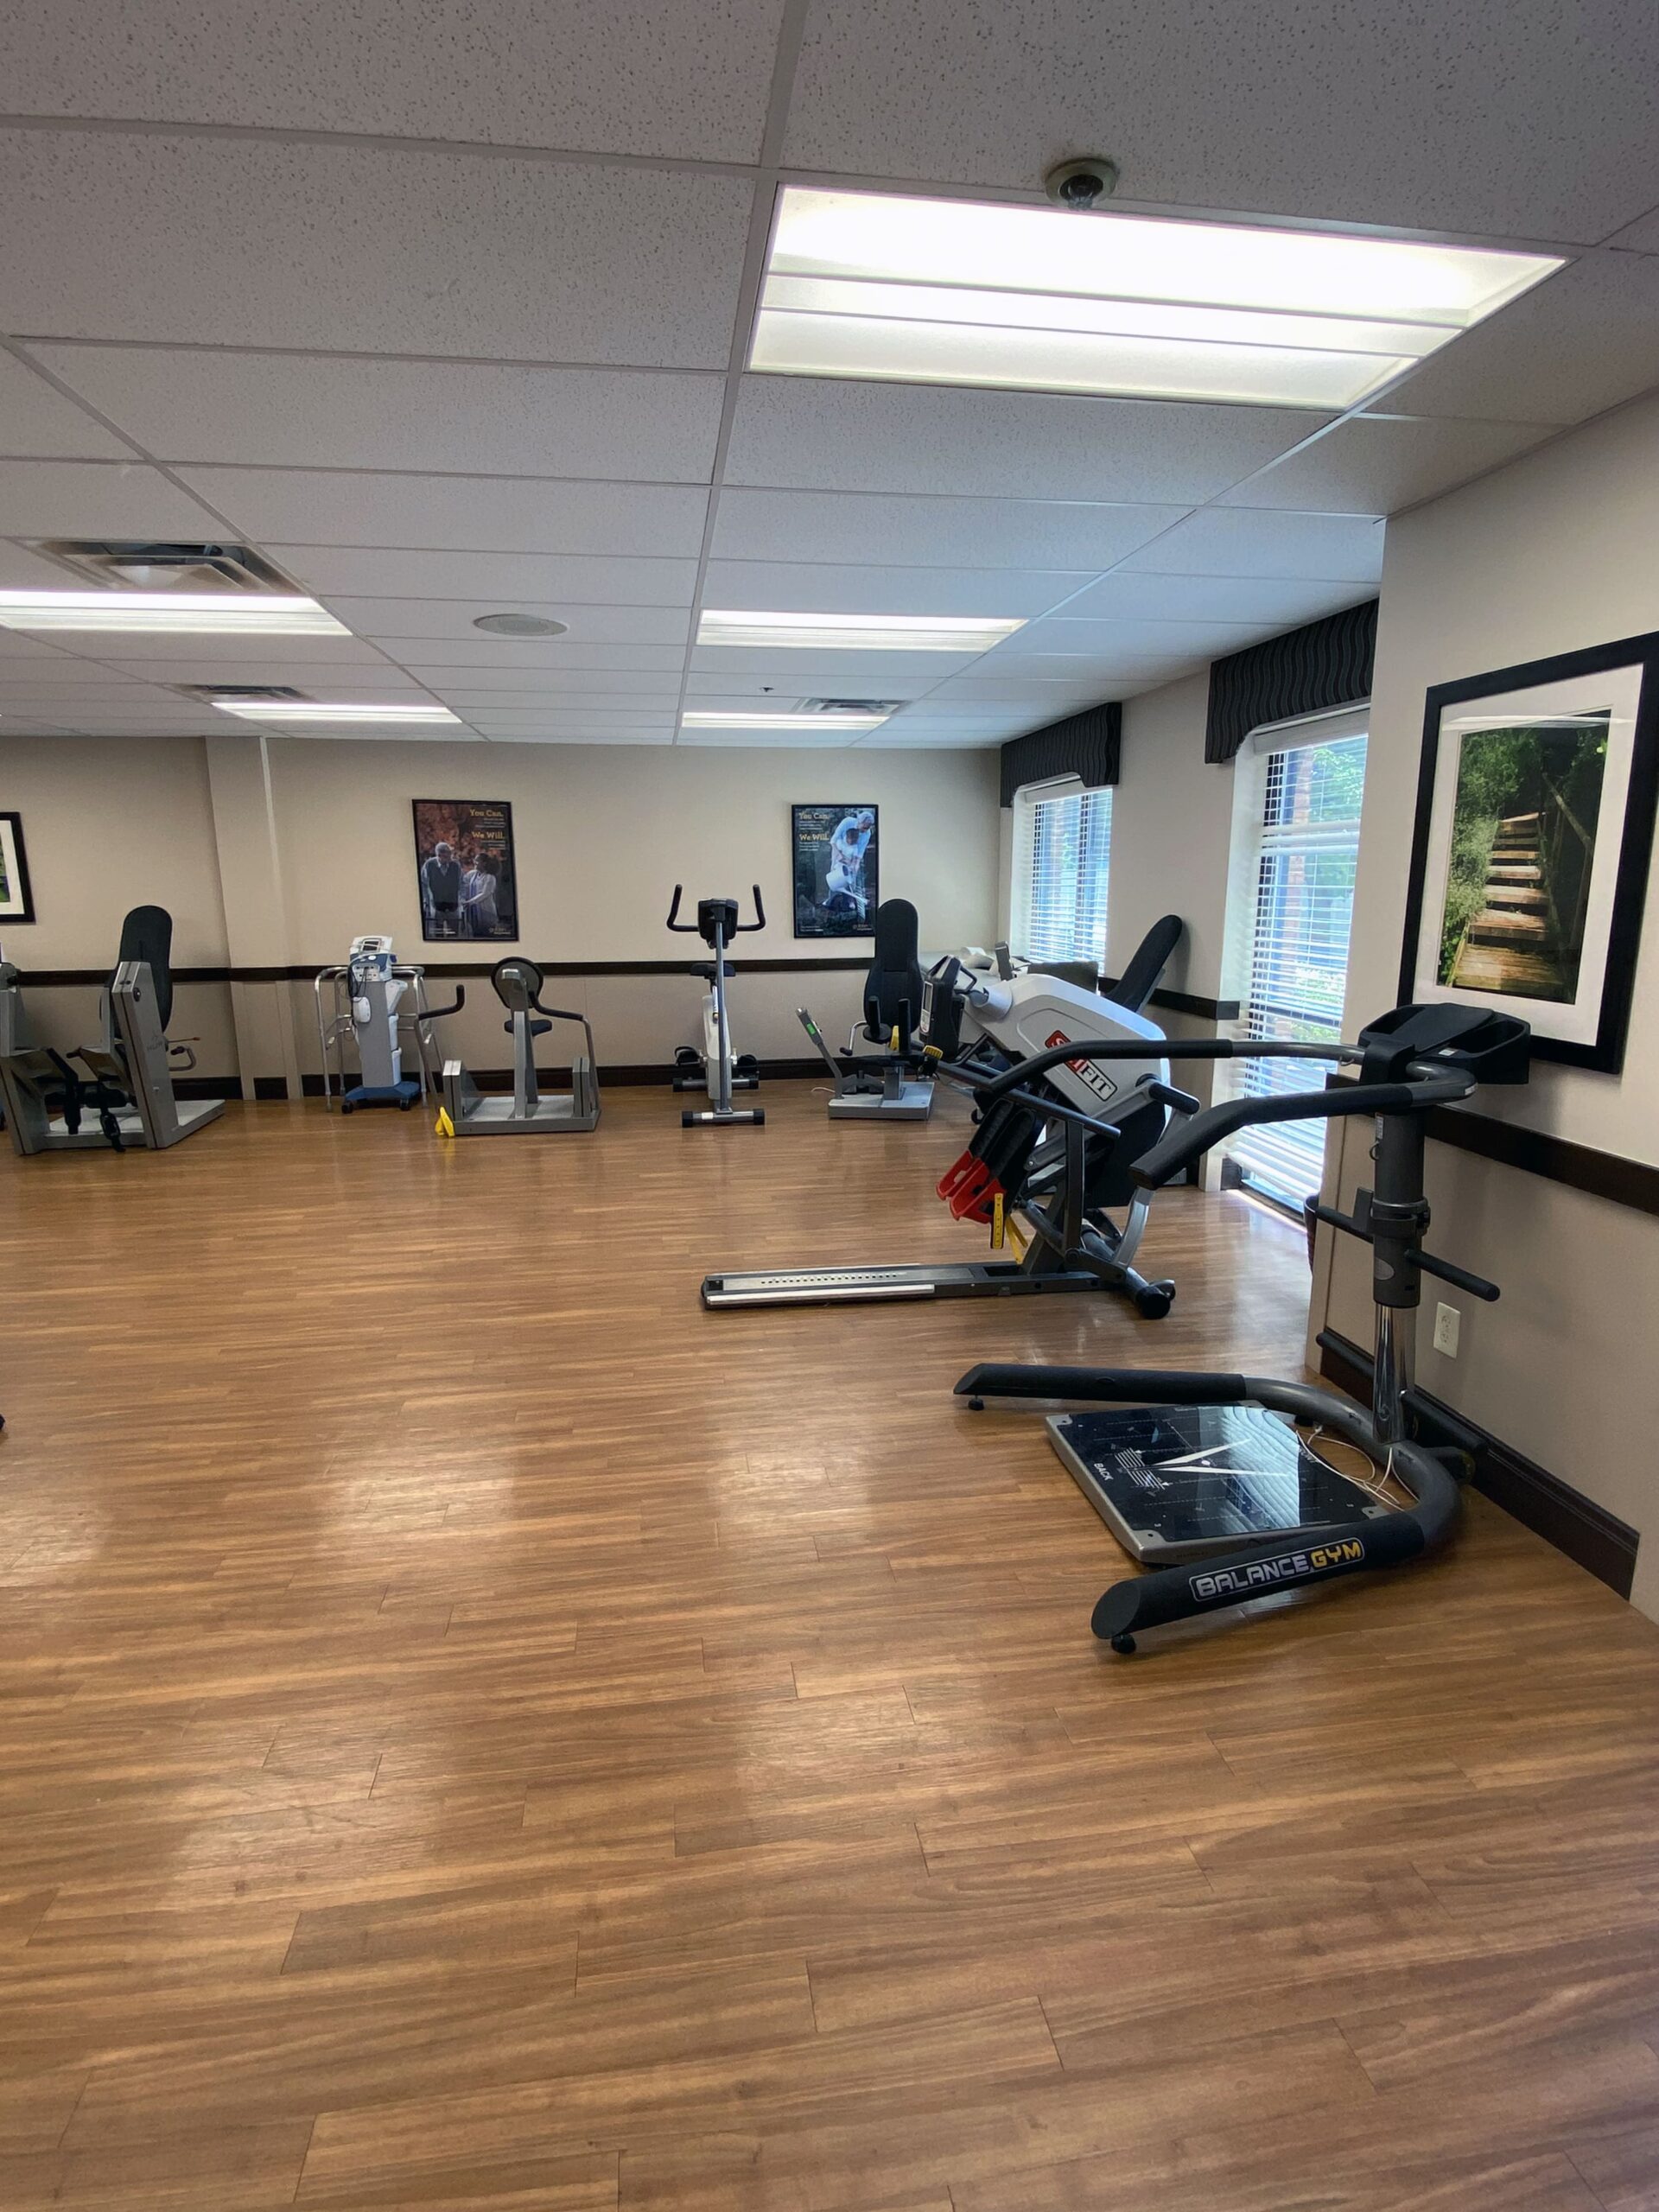 Brickyard Healthcare Willow Springs Care Center equipment for physical therapy and exercise